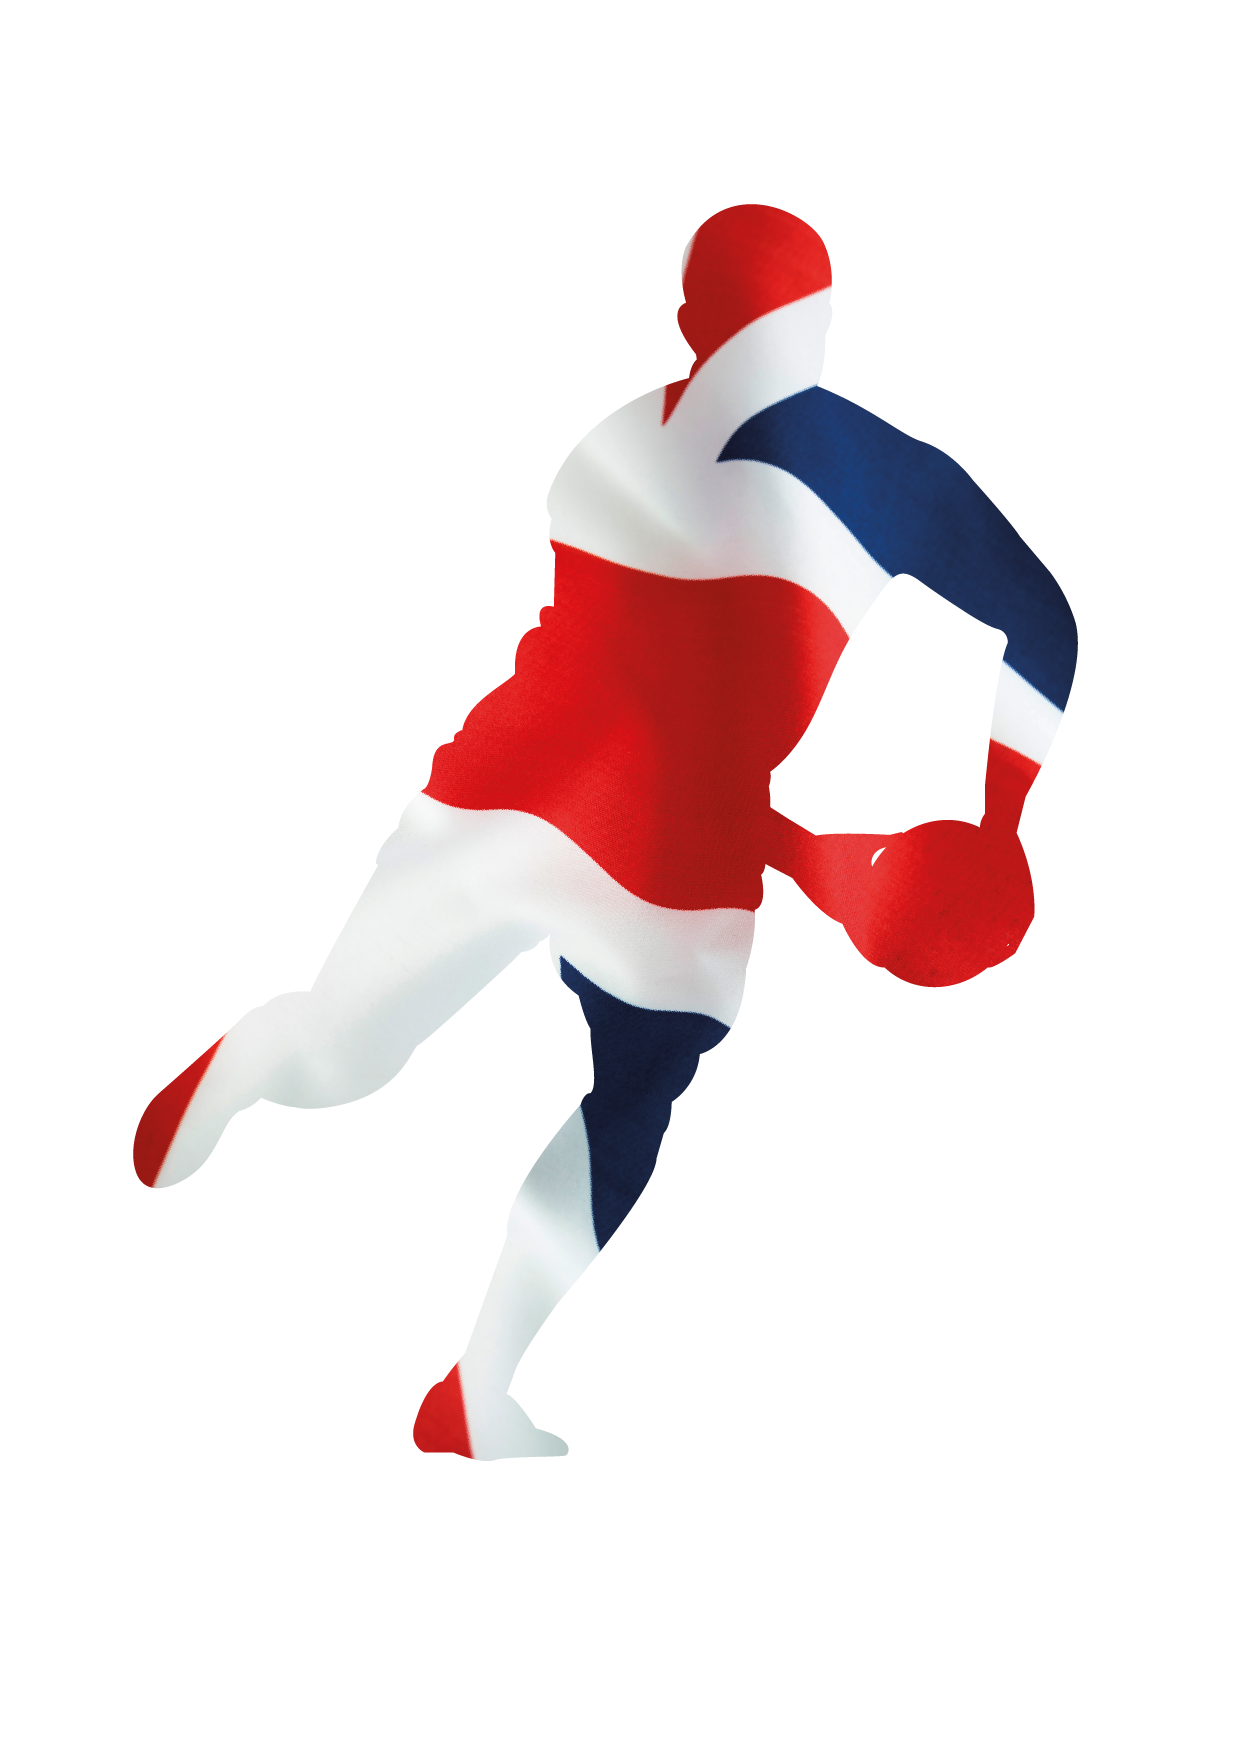 Uk sport eis performance. Pathway clipart stage direction